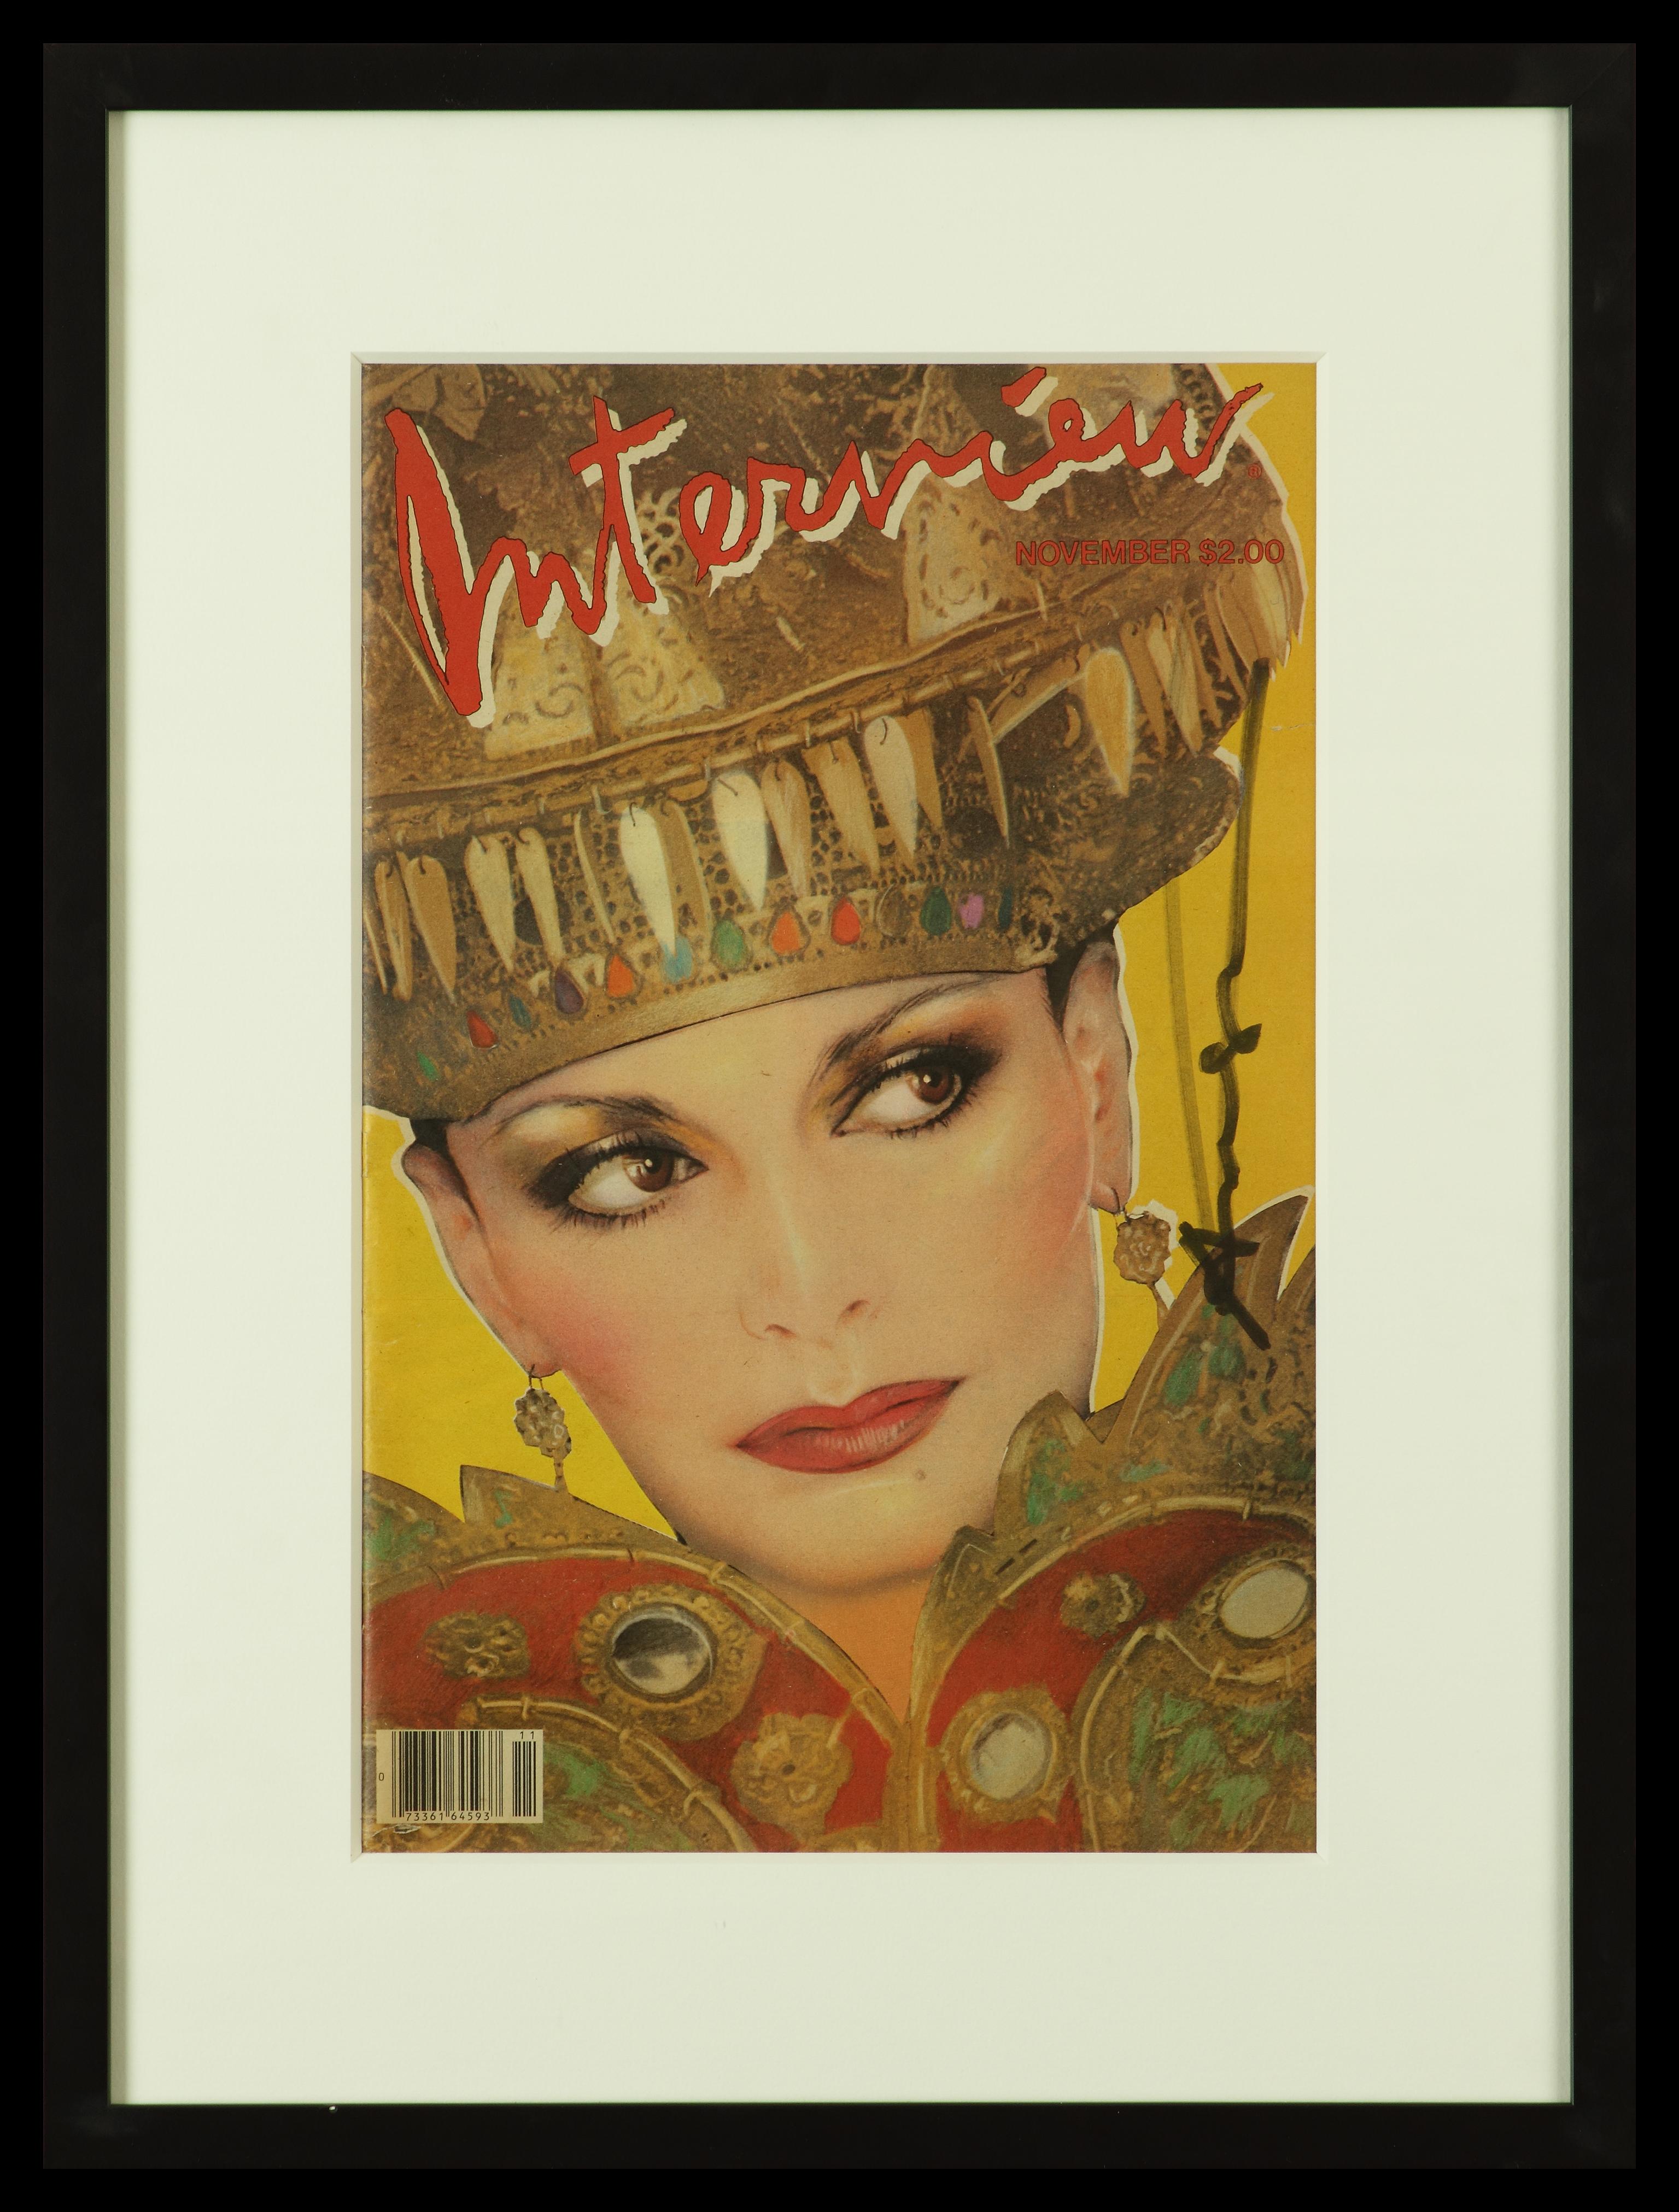  Diane Von Furstenberg Interview Cover, Signed By Andy Warhol, American, Pop Art - Print by (after) Andy Warhol